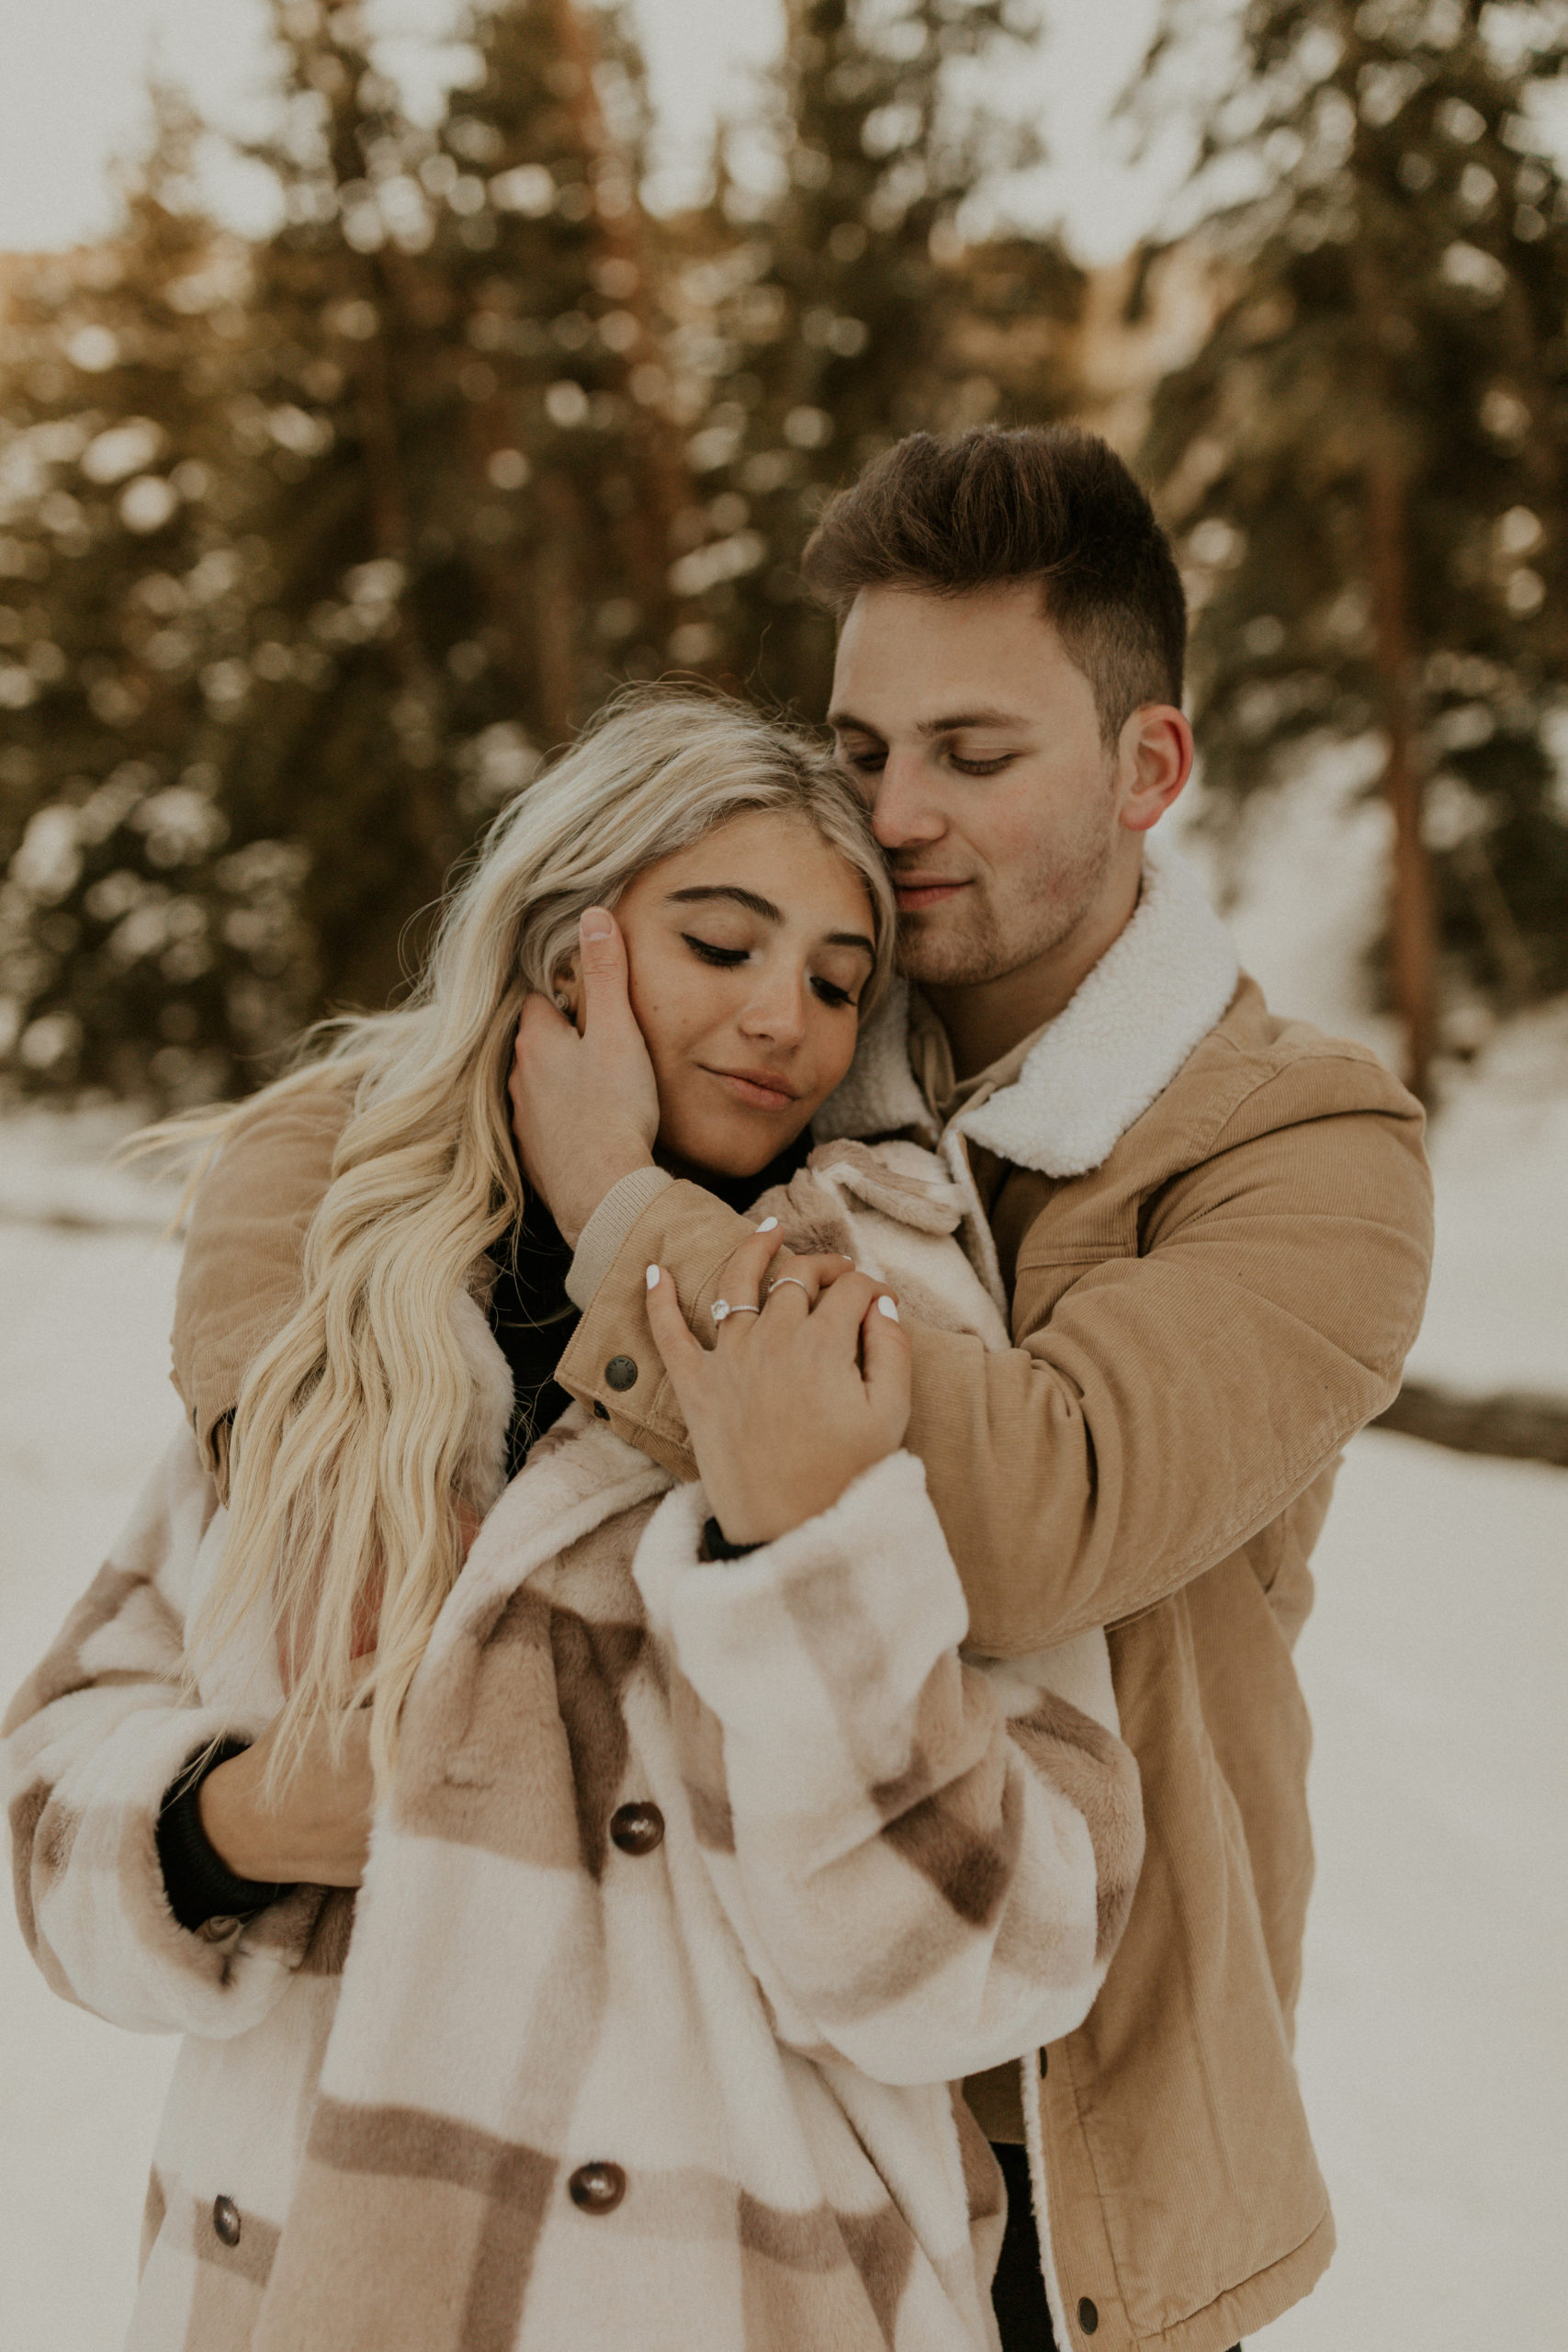 A snowy winter couples’ pregnancy announcement session while on vacation in the mountains of Vail, Colorado.